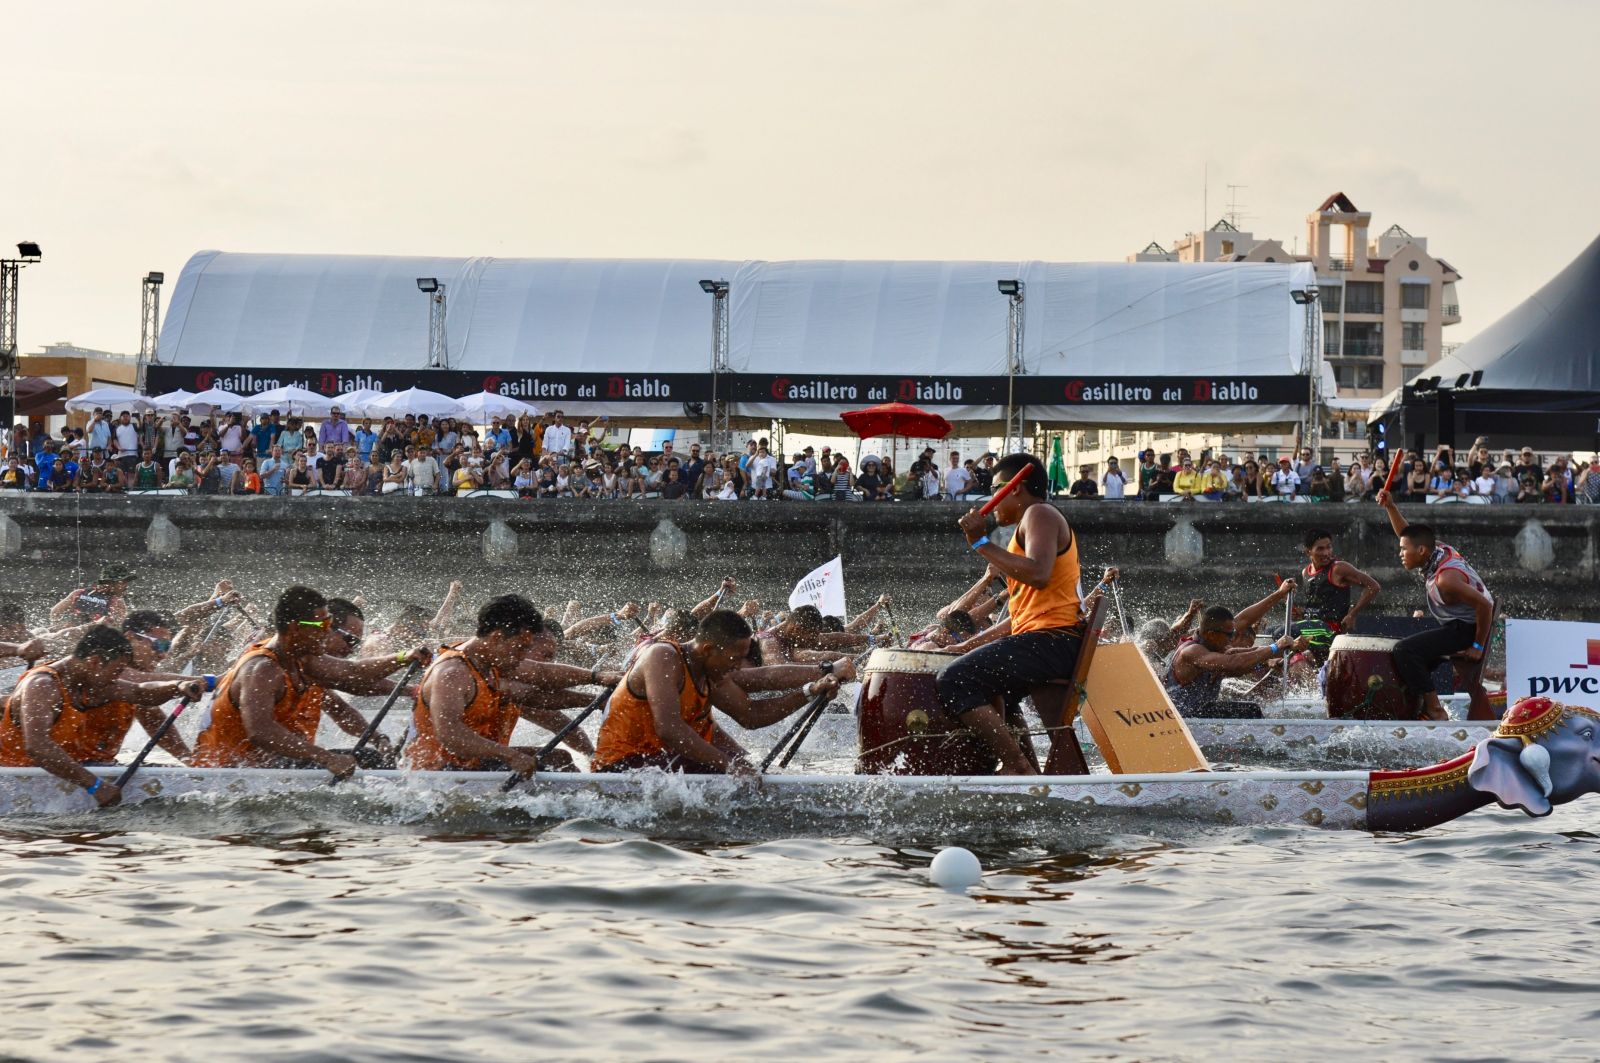 Drummers beat a rhythm to keep the paddlers moving